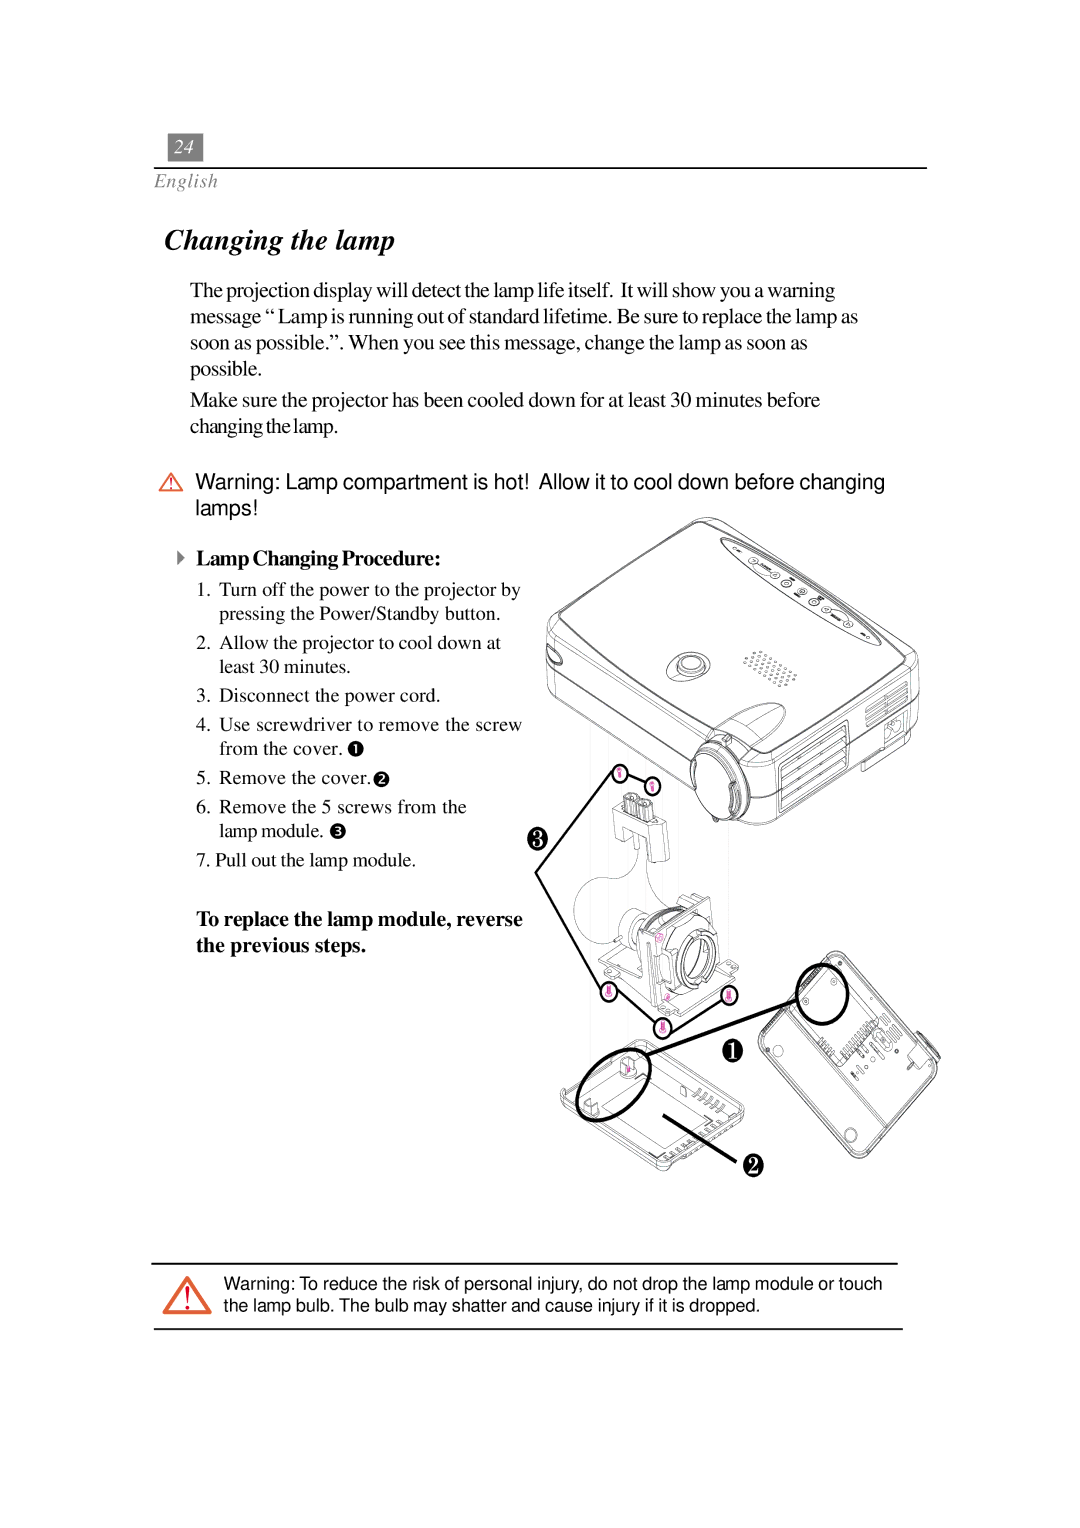 Optoma Technology EP730 manual 4Lamp Changing Procedure, To replace the lamp module, reverse the previous steps 